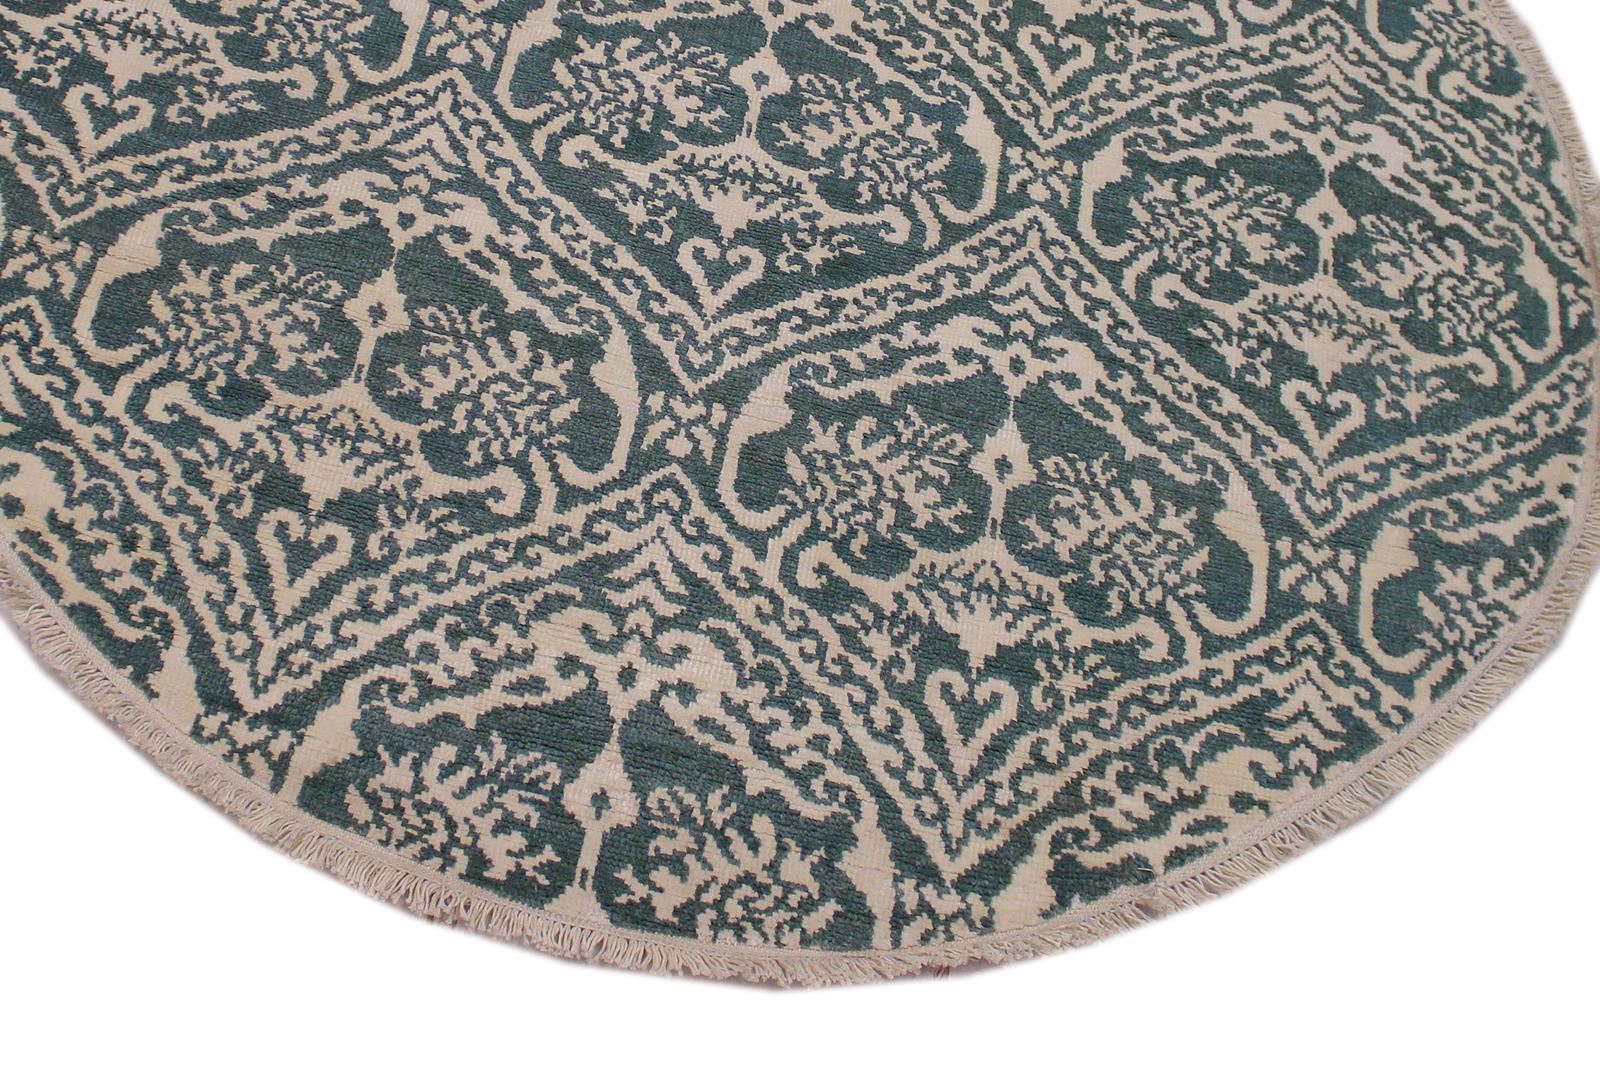 A10456, 6 1"x 6 1",Traditional                   ,6x6,Green,IVORY,Hand-knotted                  ,Pakistan   ,Wool&silk  ,Round      ,652671191886